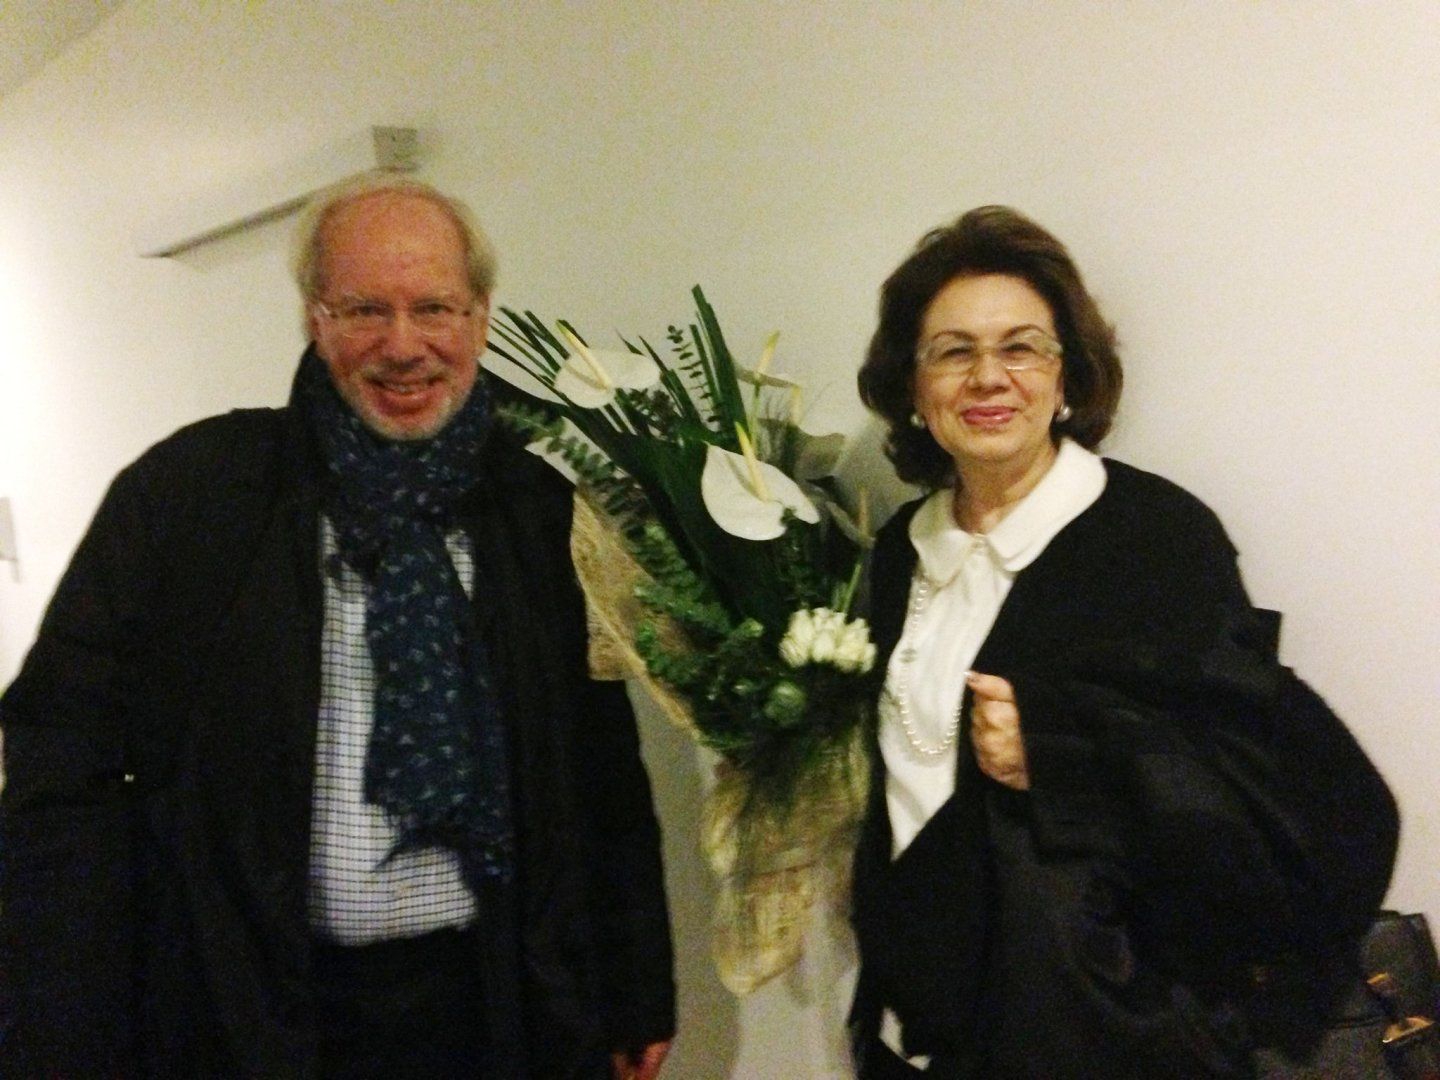 Founder of Premier LTD speaks about Gidon Kremer's and his orchestra's concert in Baku [PHOTOS]